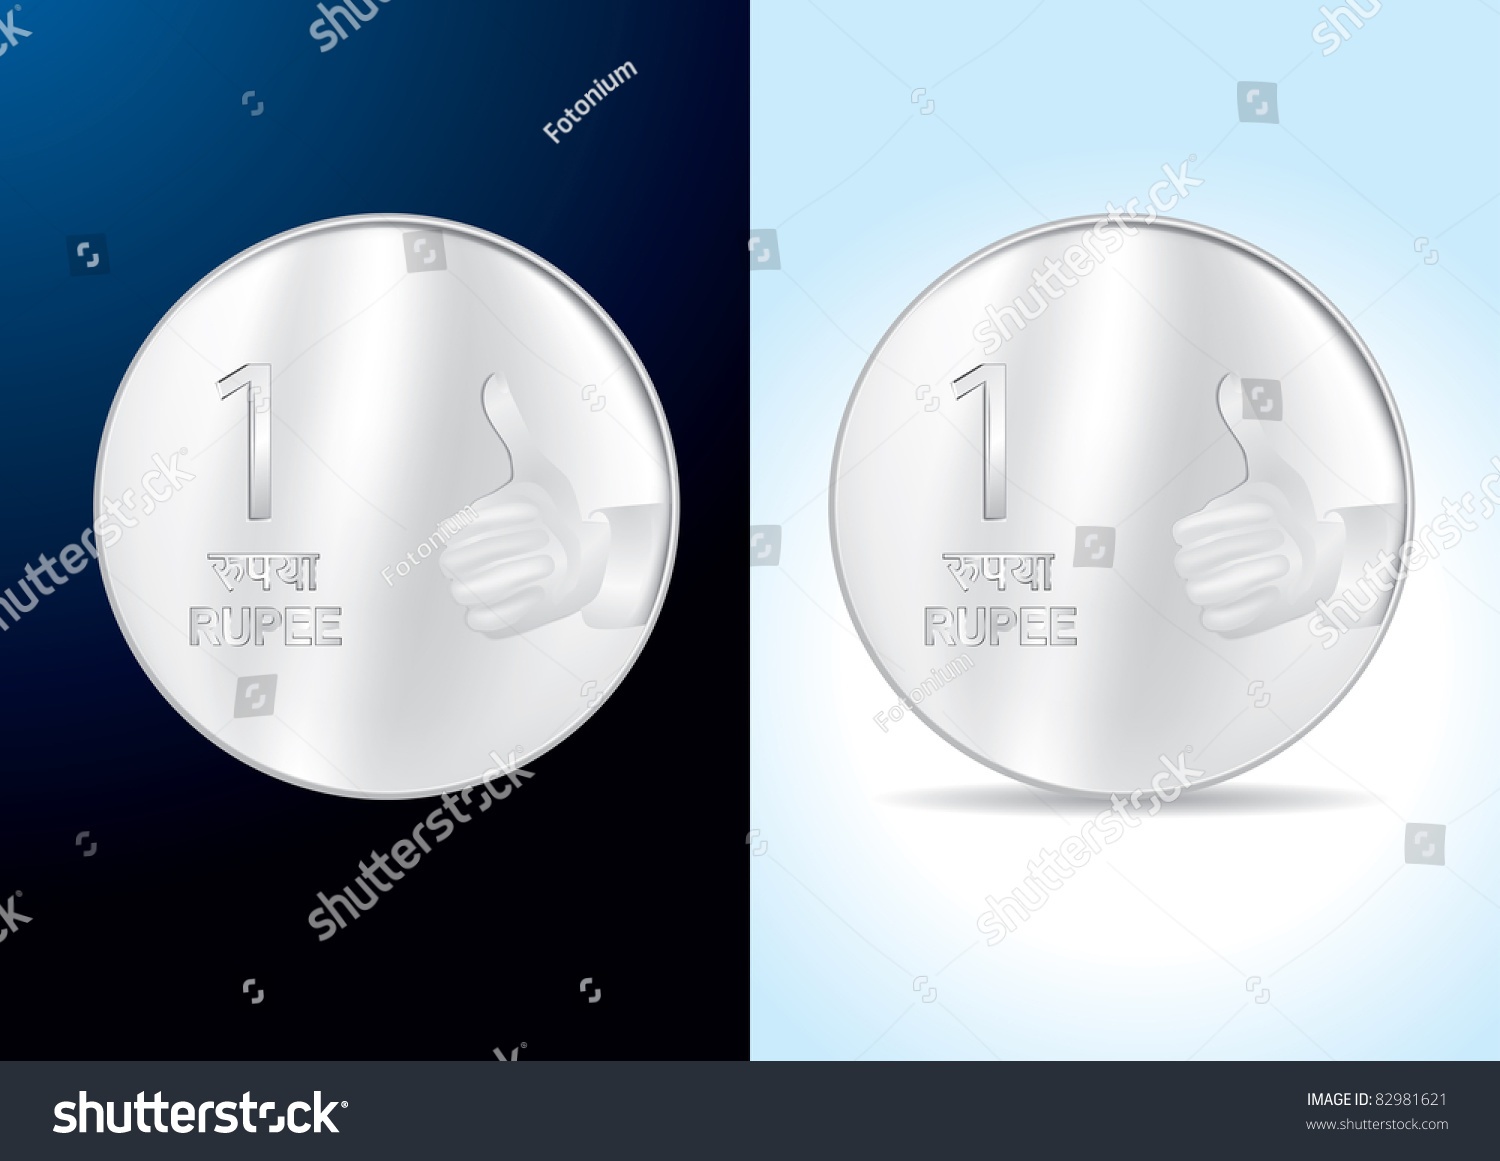 SVG of Indian One Rupee Coin - Vector Illustration svg